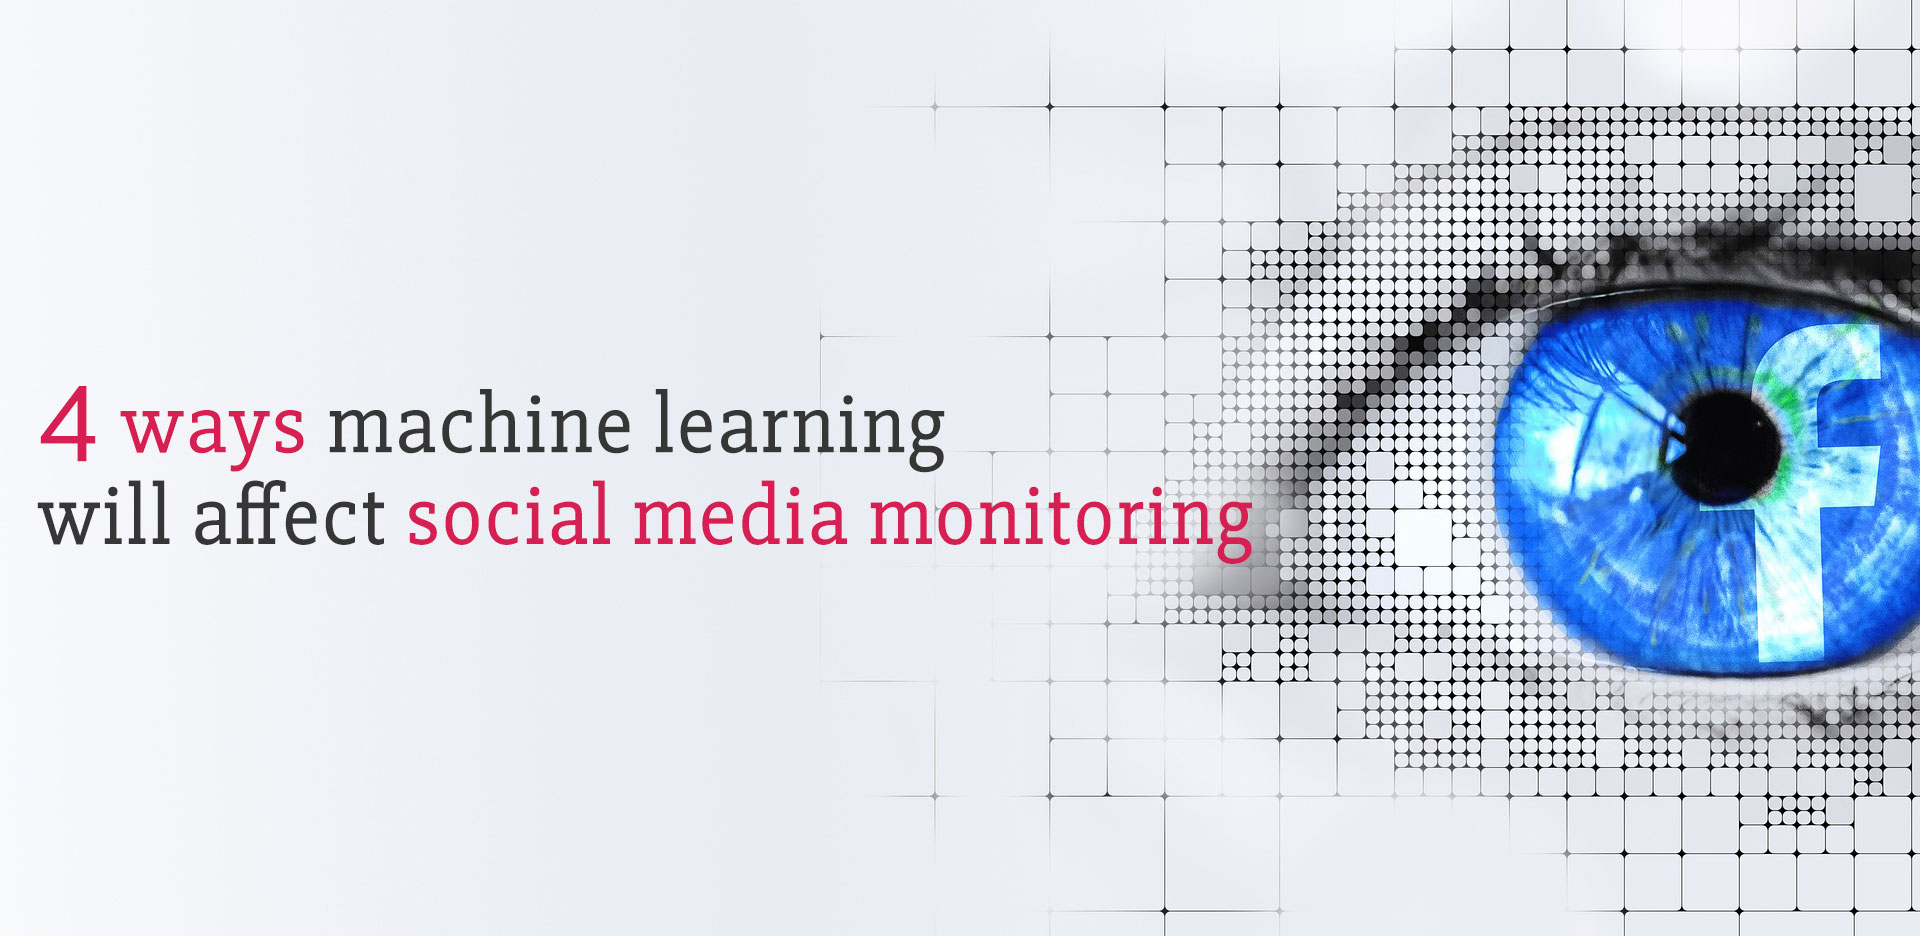 Ways in which machine learning will affect social media platforms